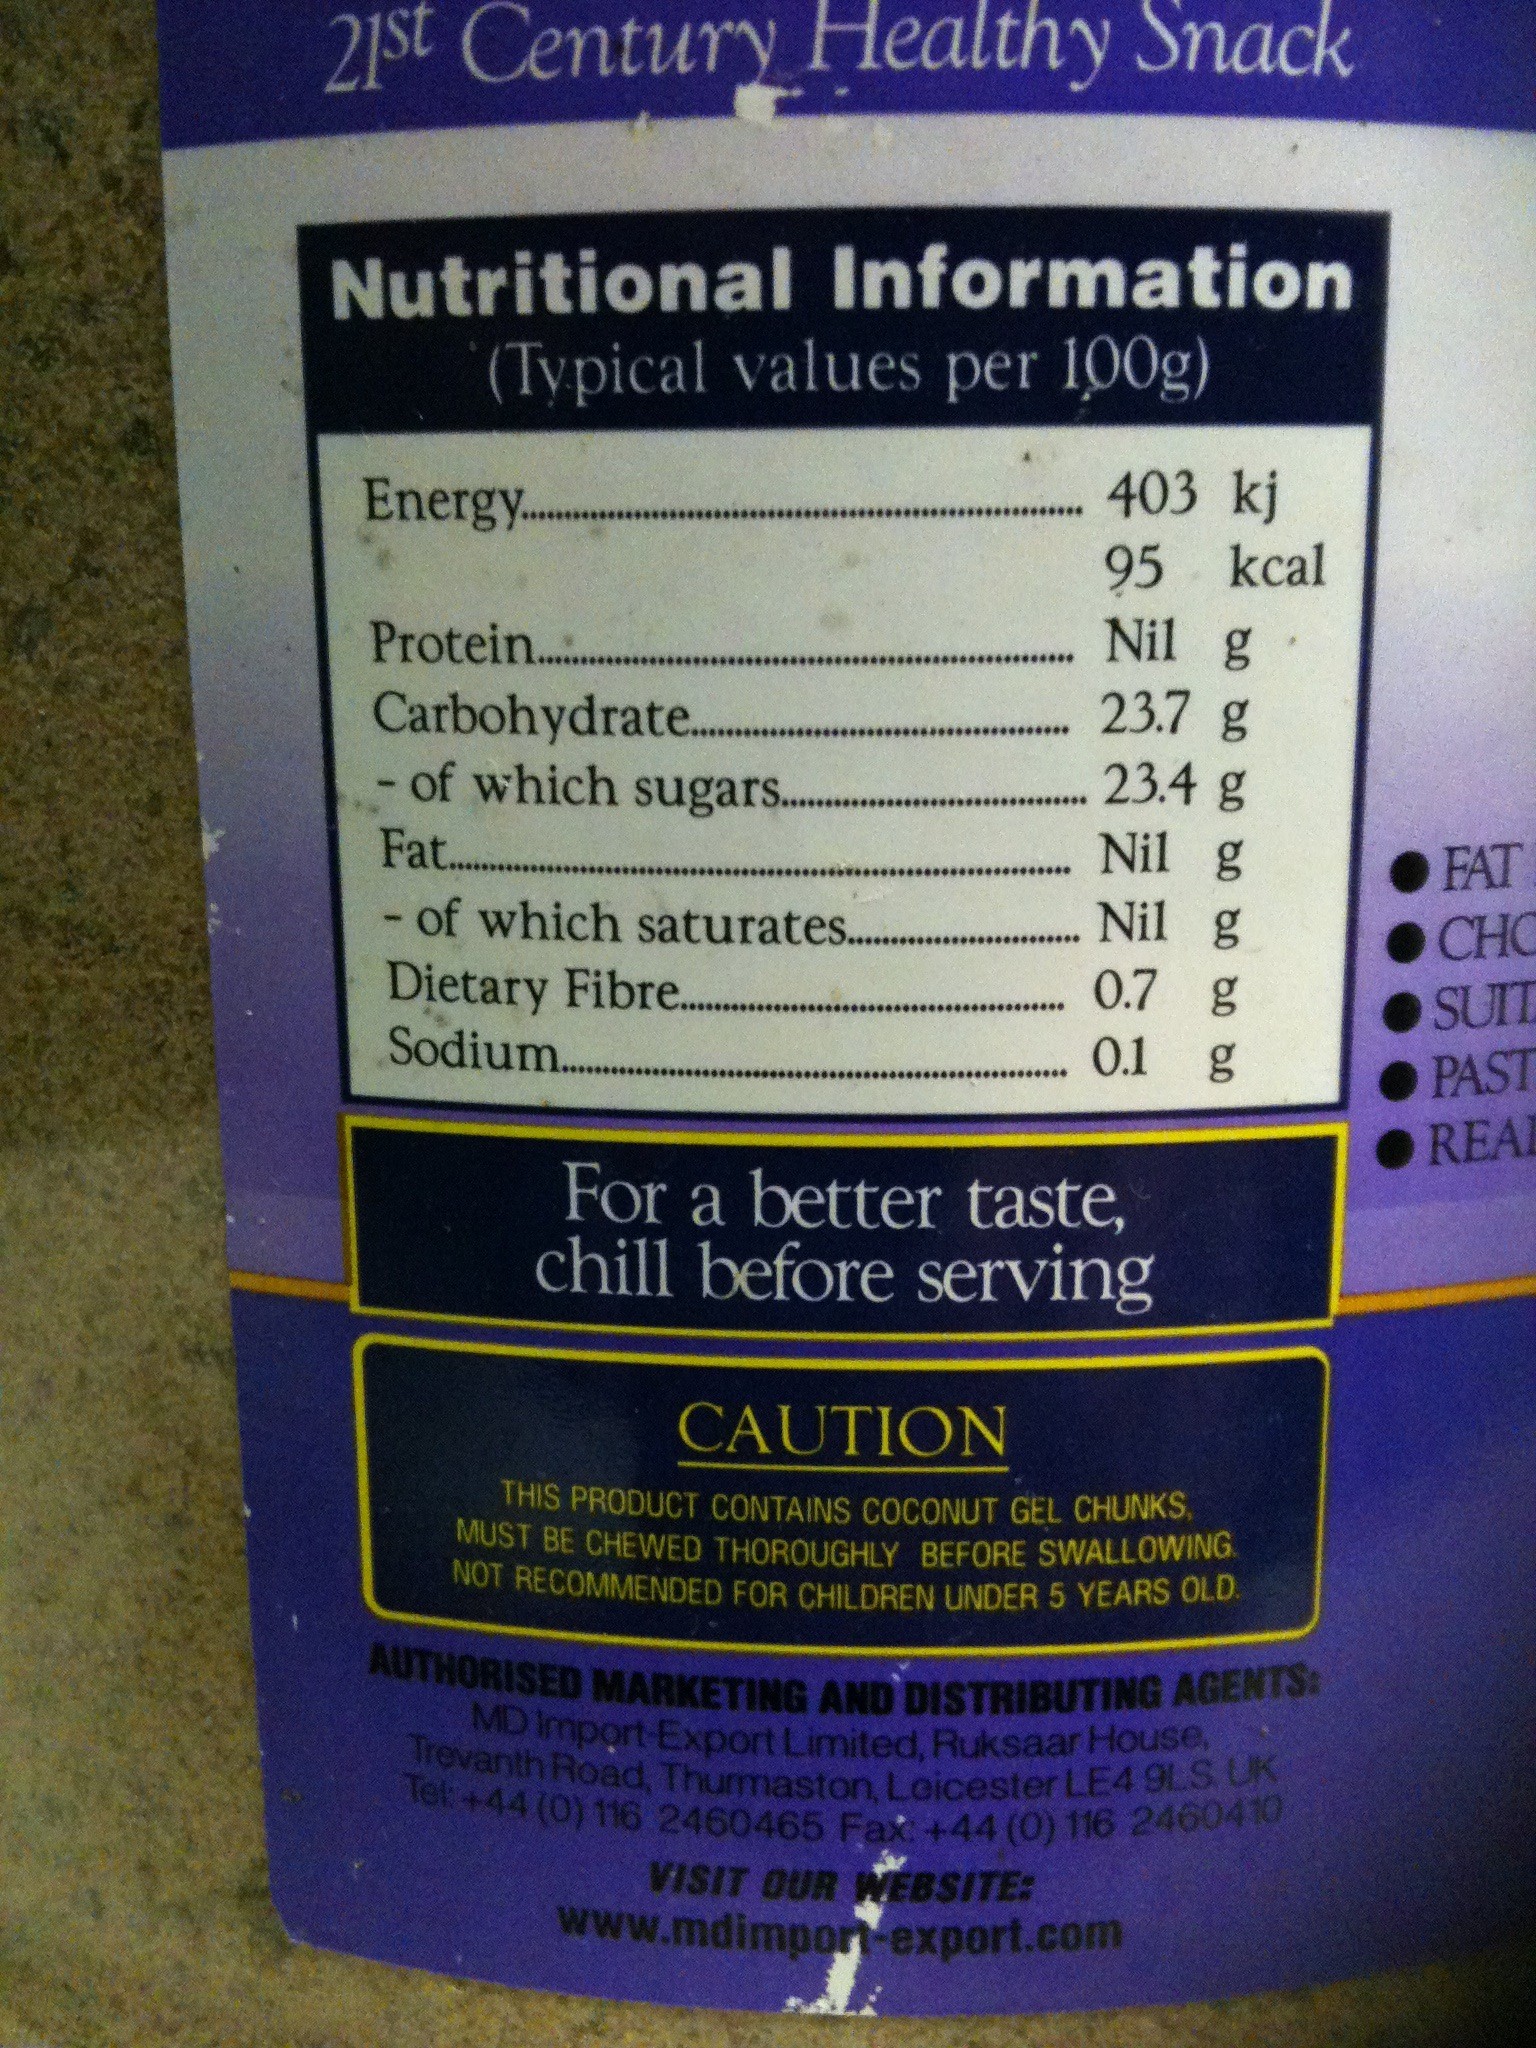 Nutritional information with warning